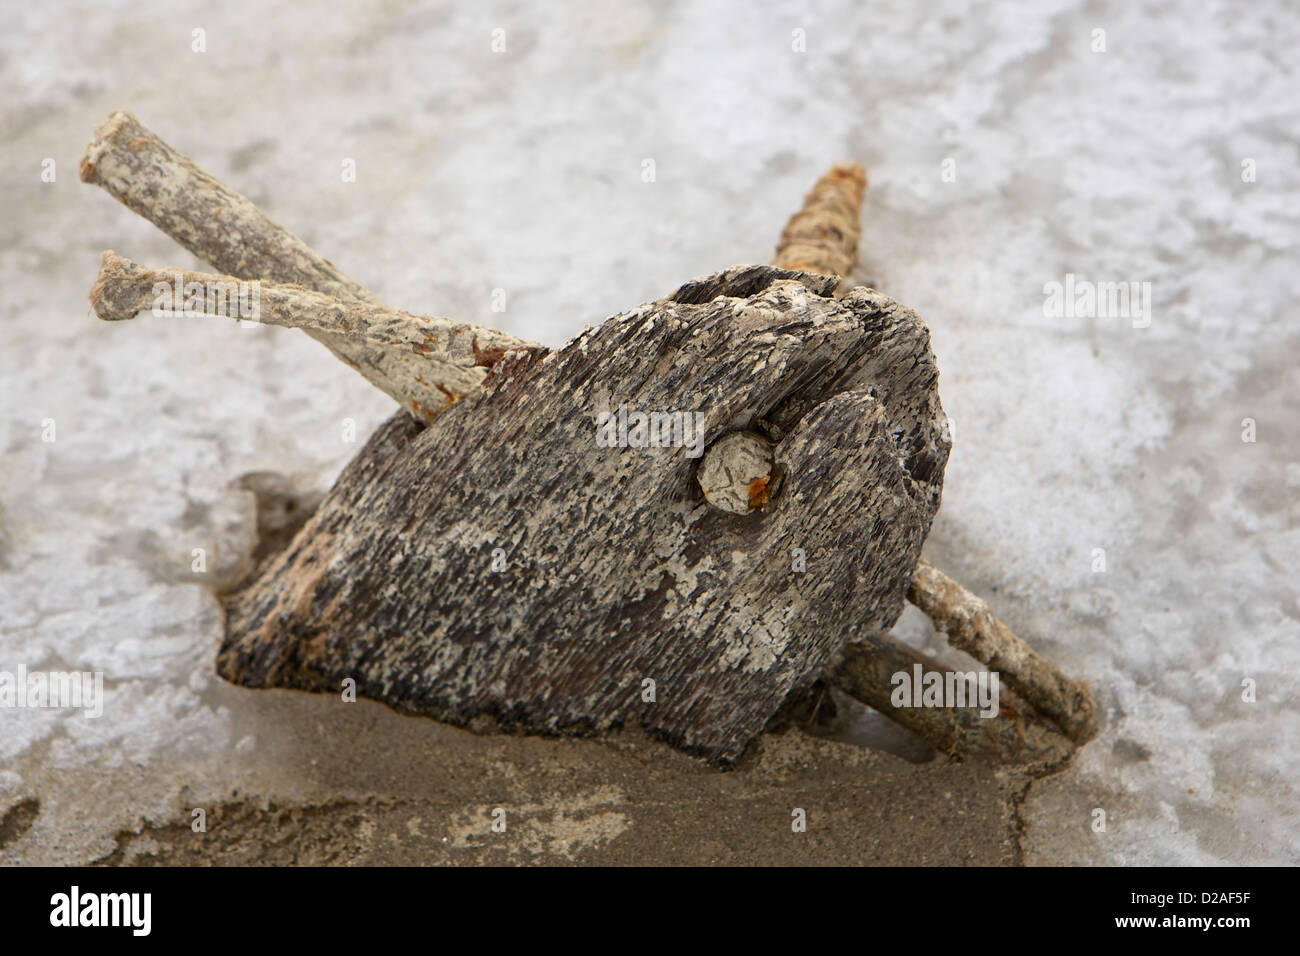 close-up of shipwreck remains showing wooden rib and iron spikes Stock Photo